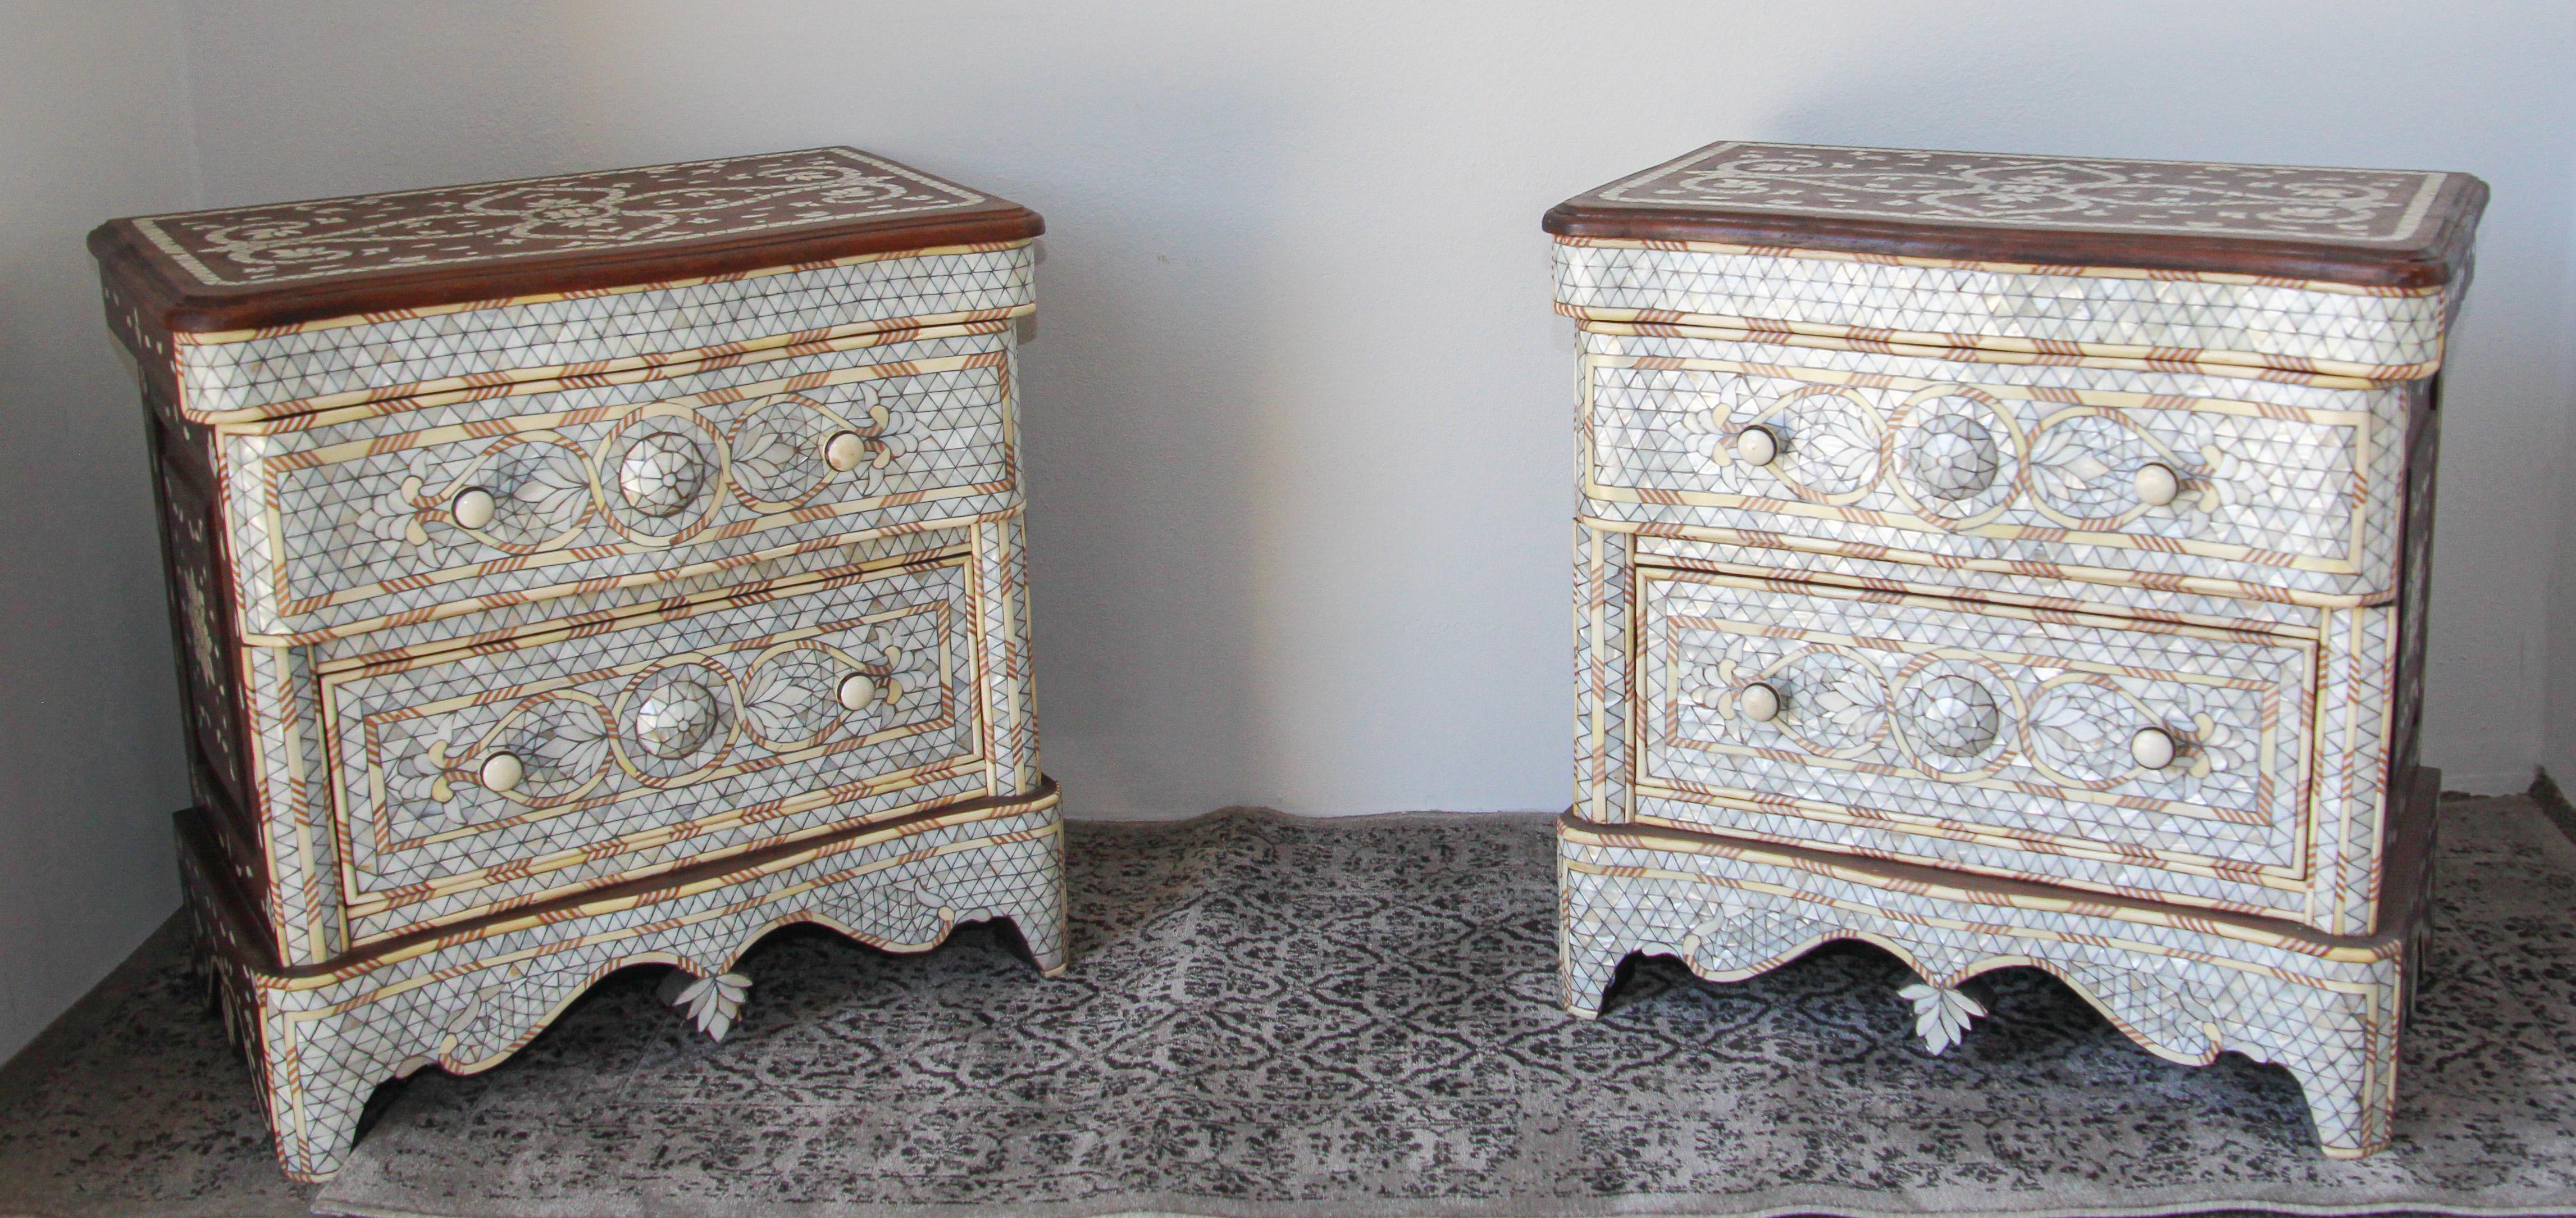 moroccan bedside tables